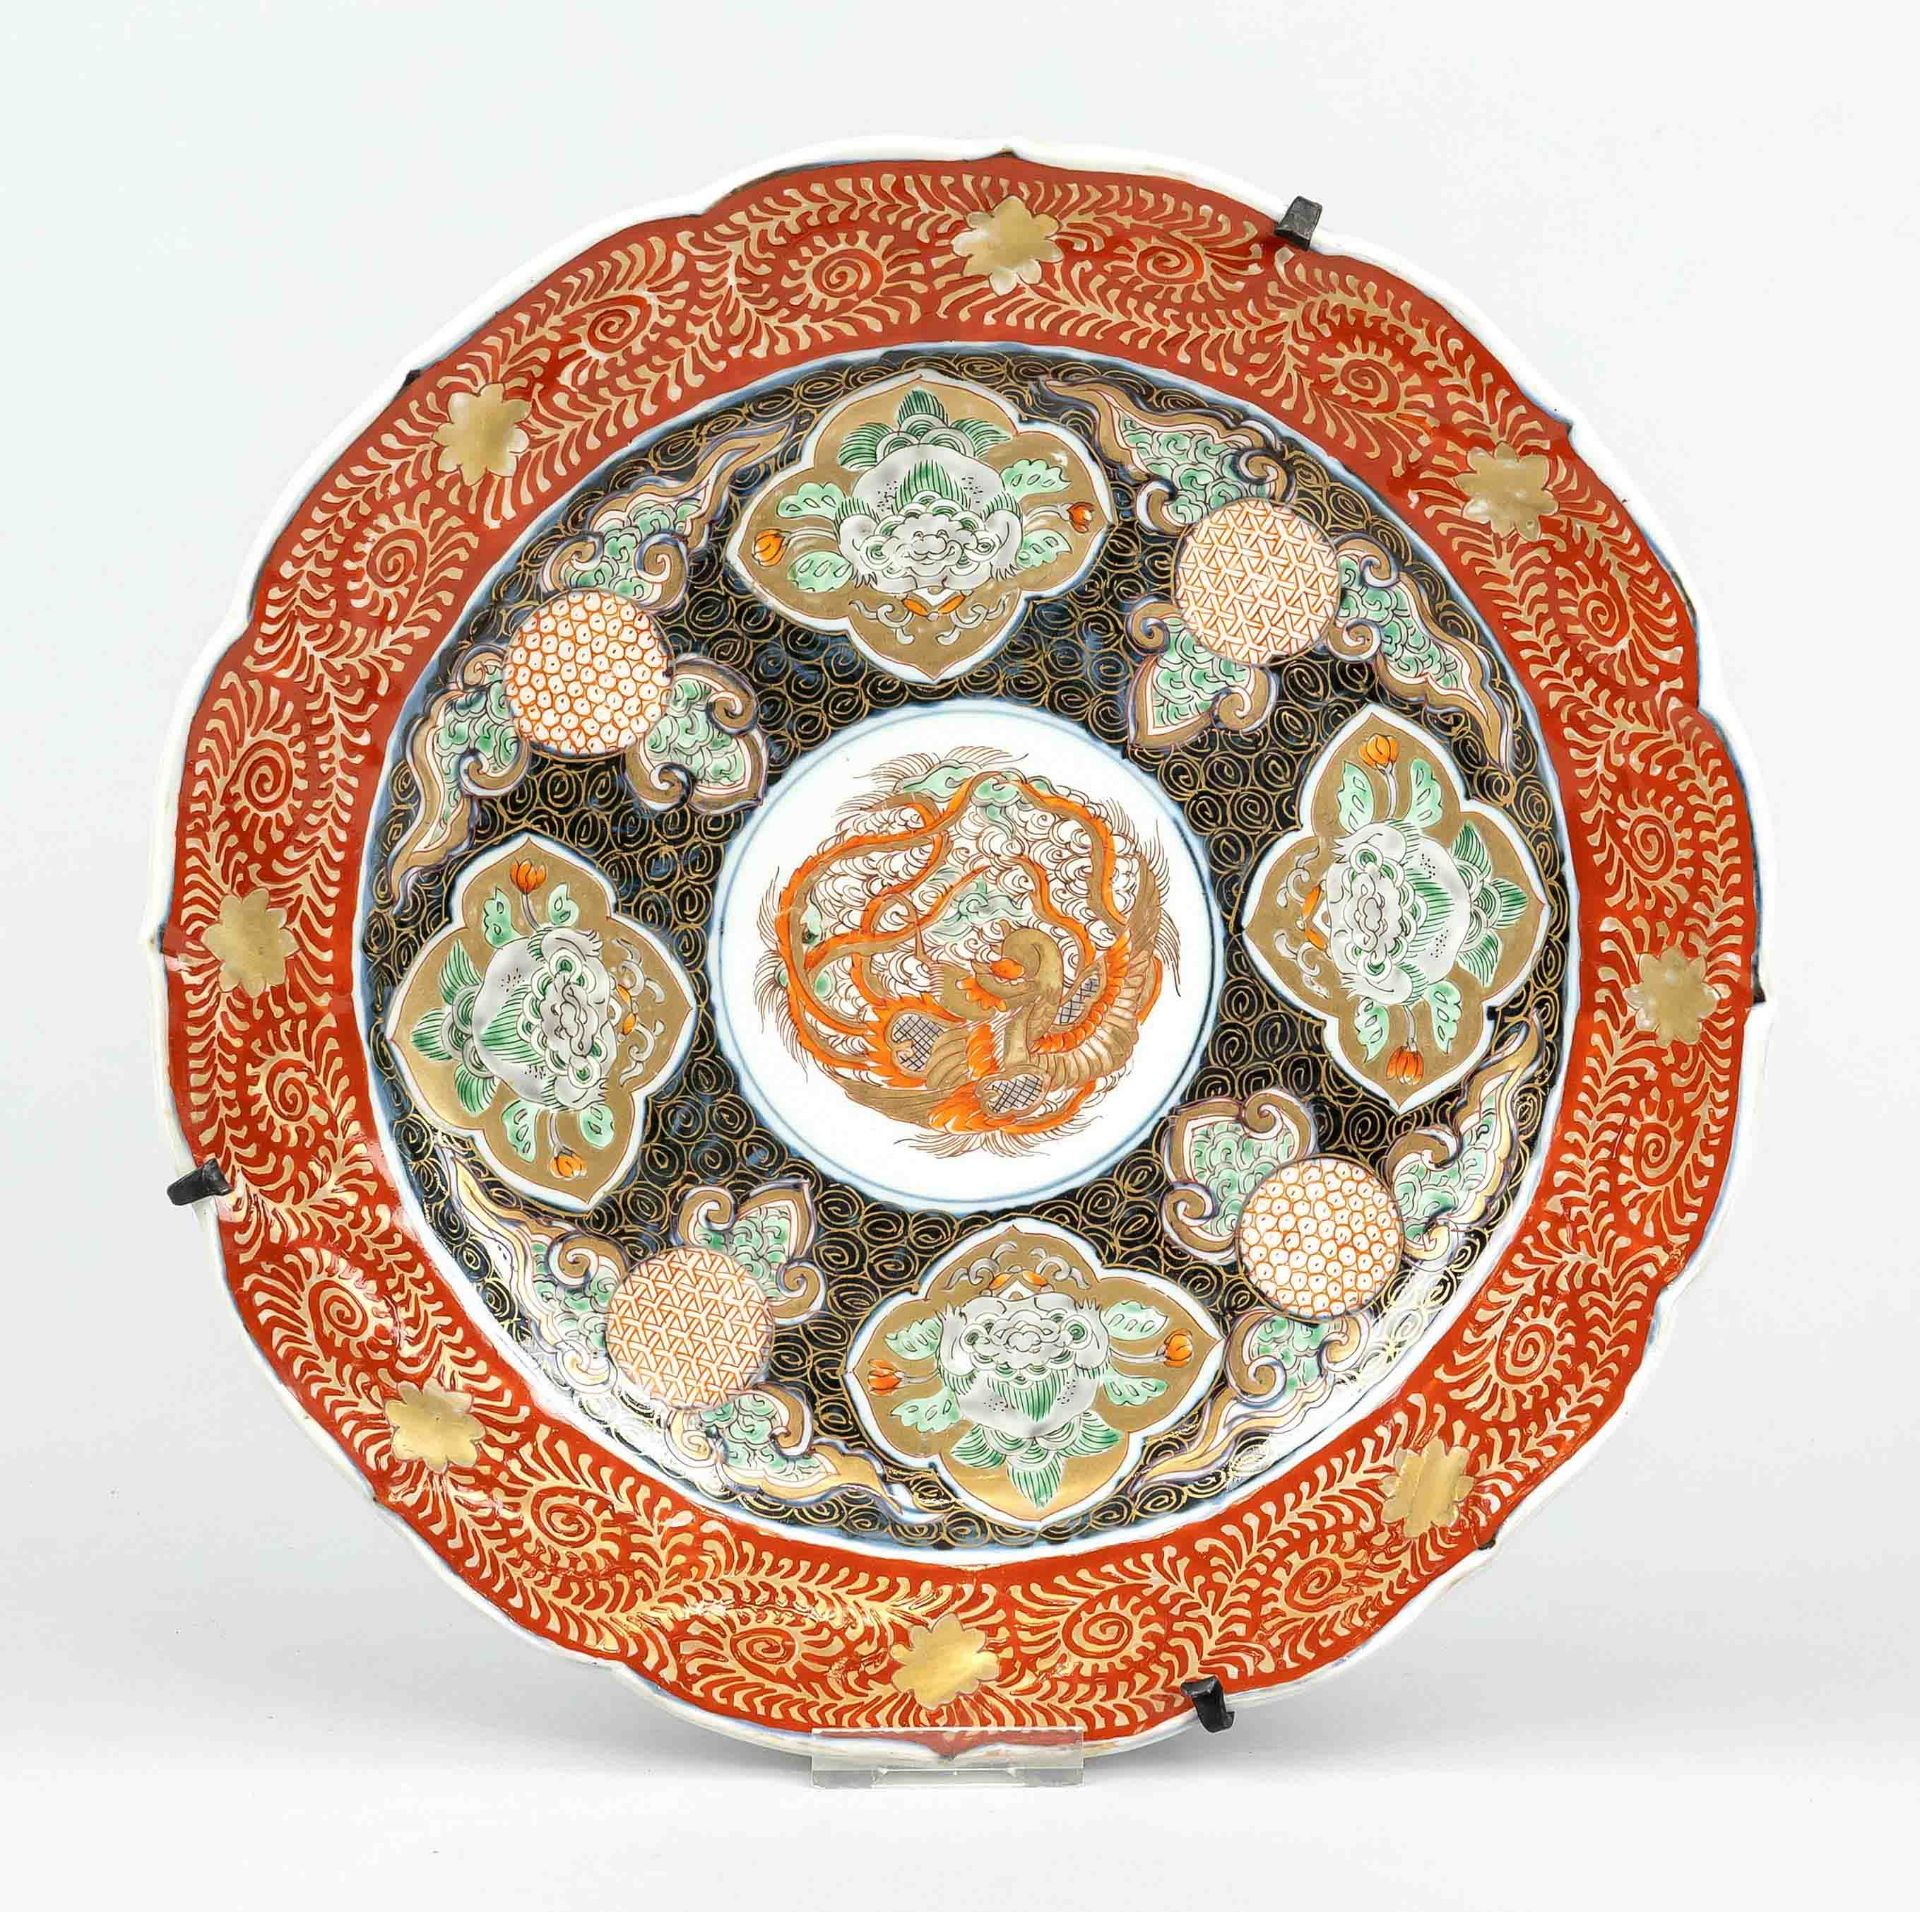 Imari plate, Japan, around 1800, POrcelain with polychrome painting and gold color, flower-shaped